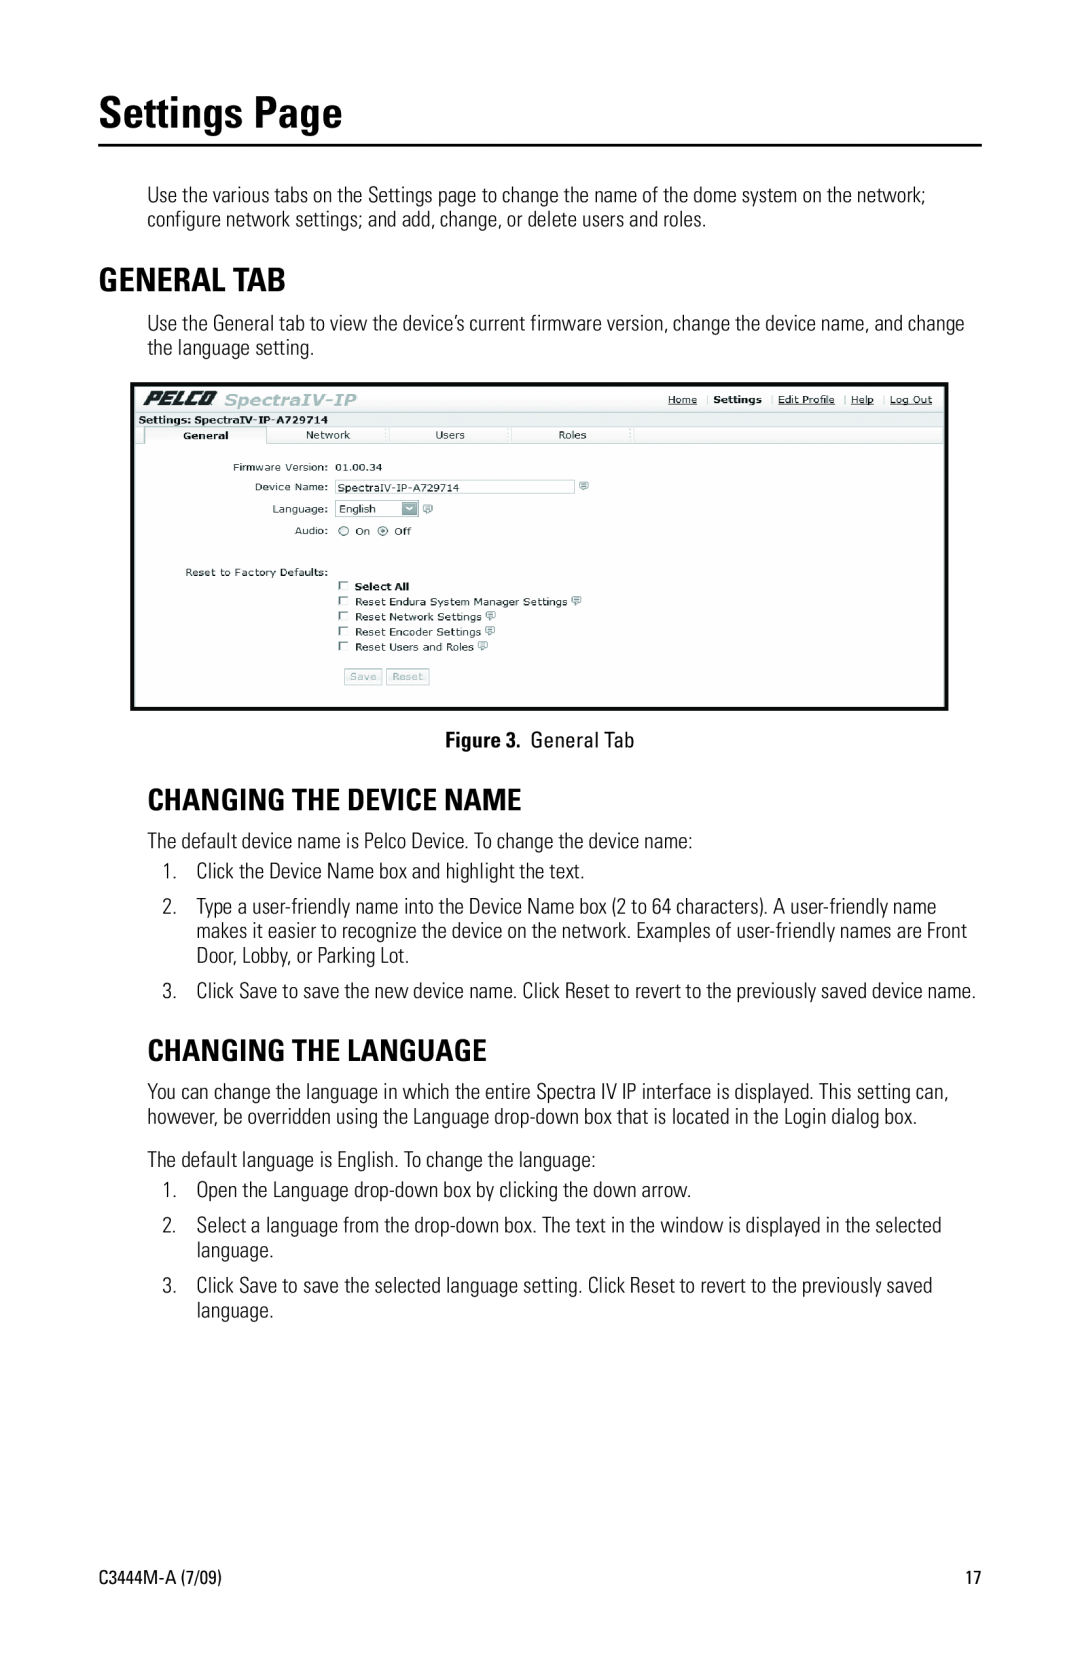 Pelco IV IP manual Settings Page, General Tab, Changing The Device Name, Changing The Language 